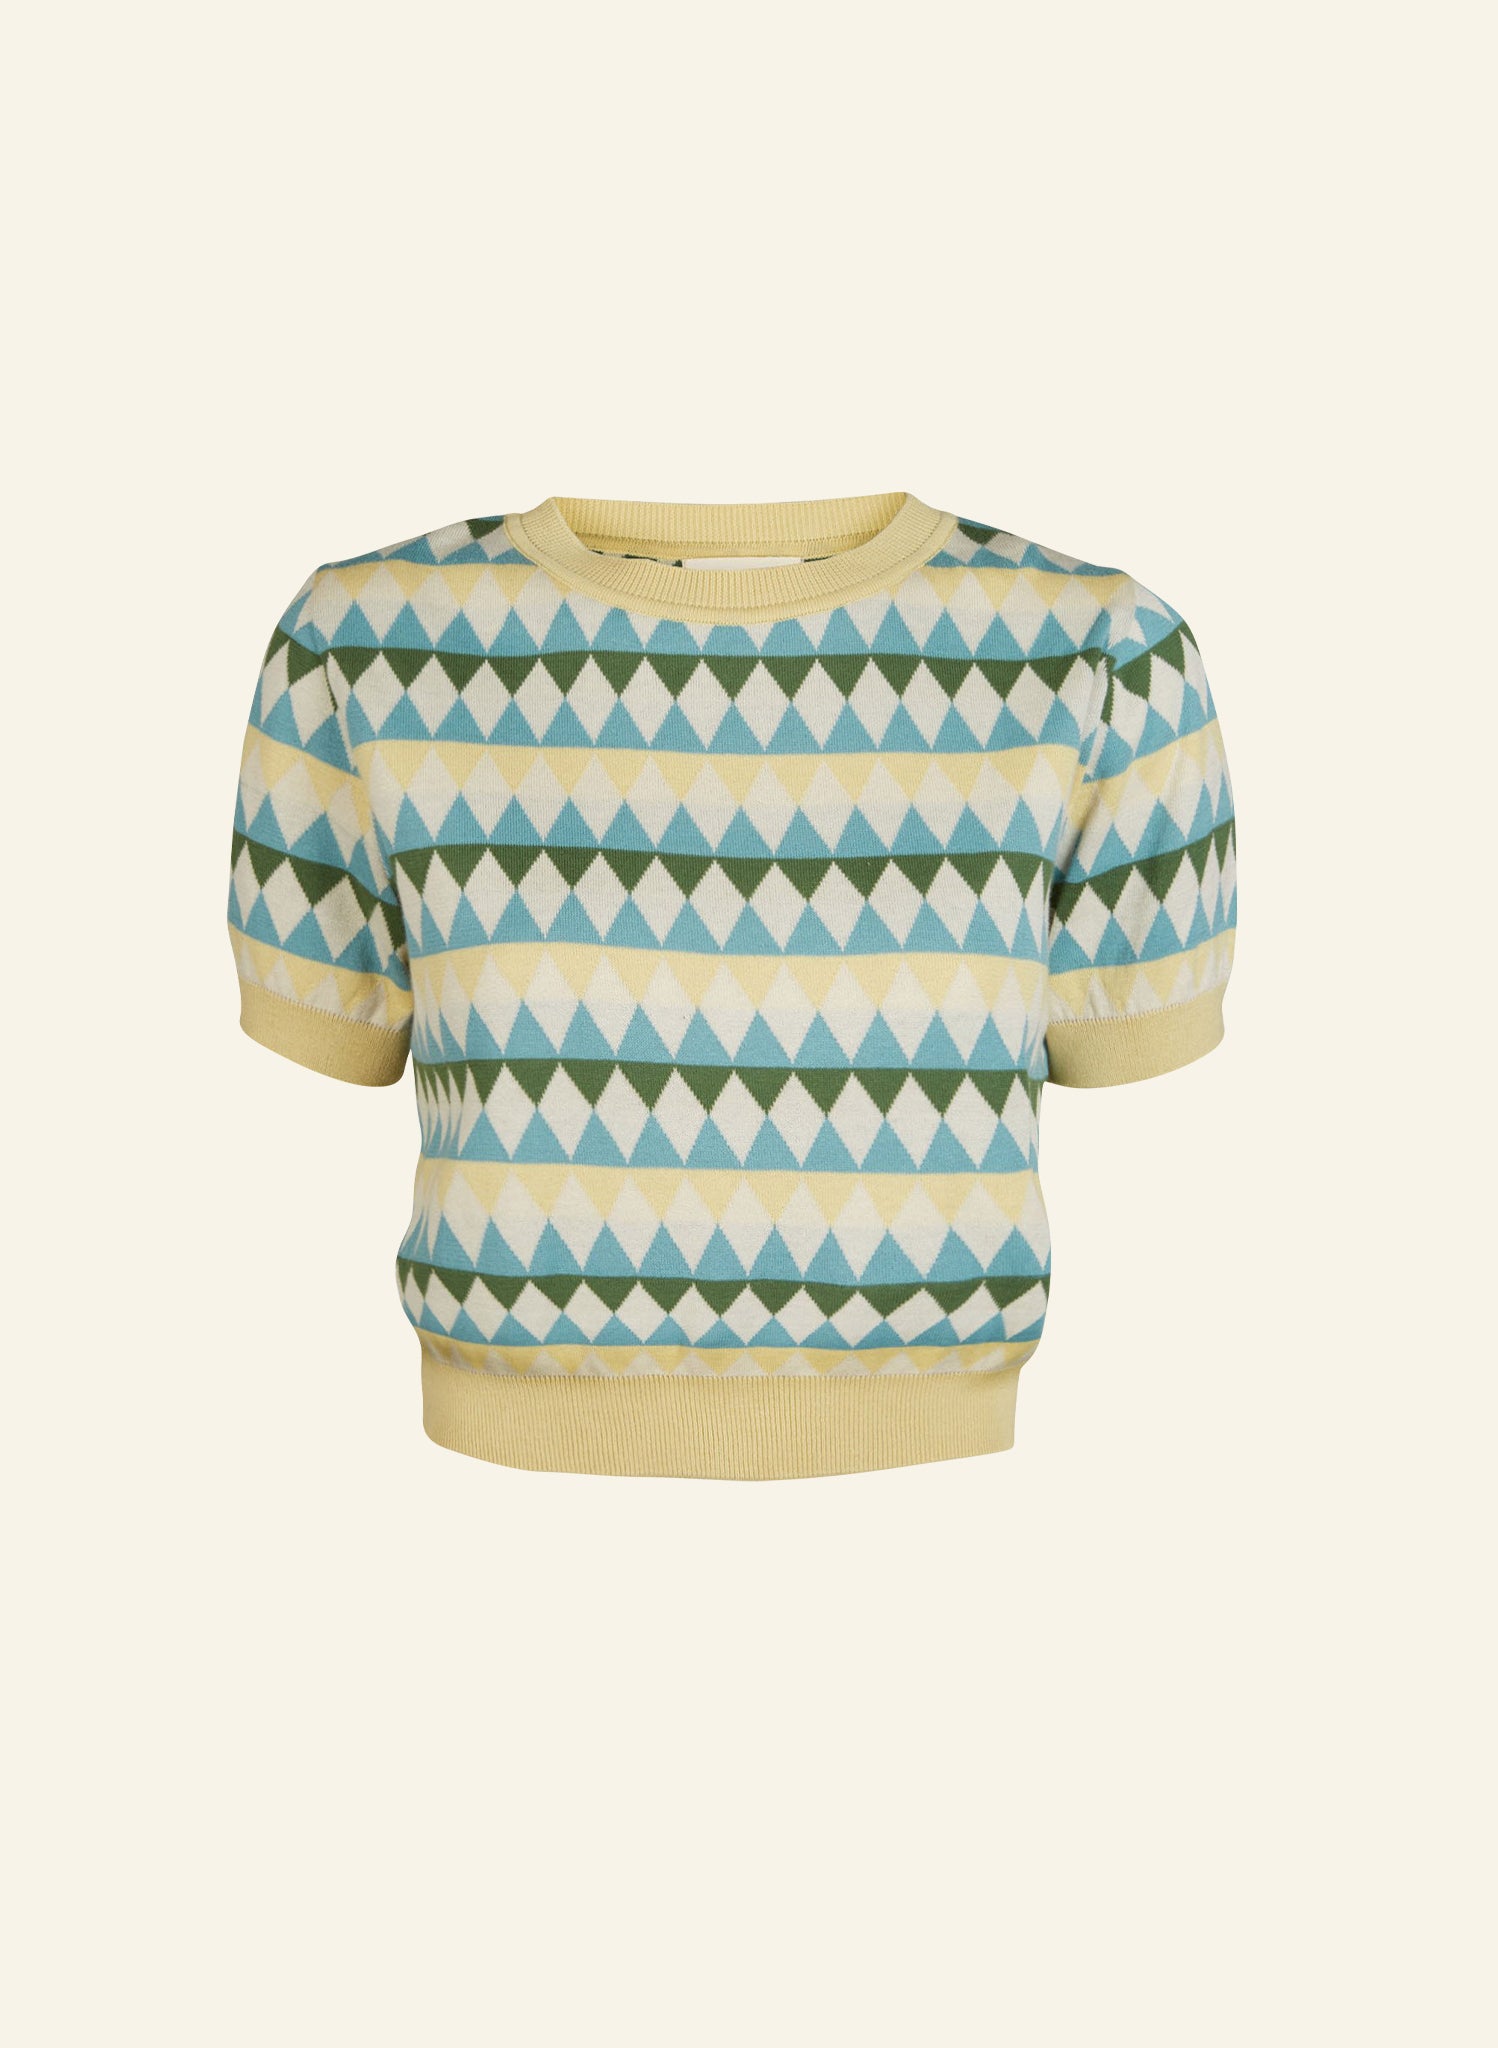 Eve Harlequin Knitted Top - Teal and Lemon | Organic Cotton